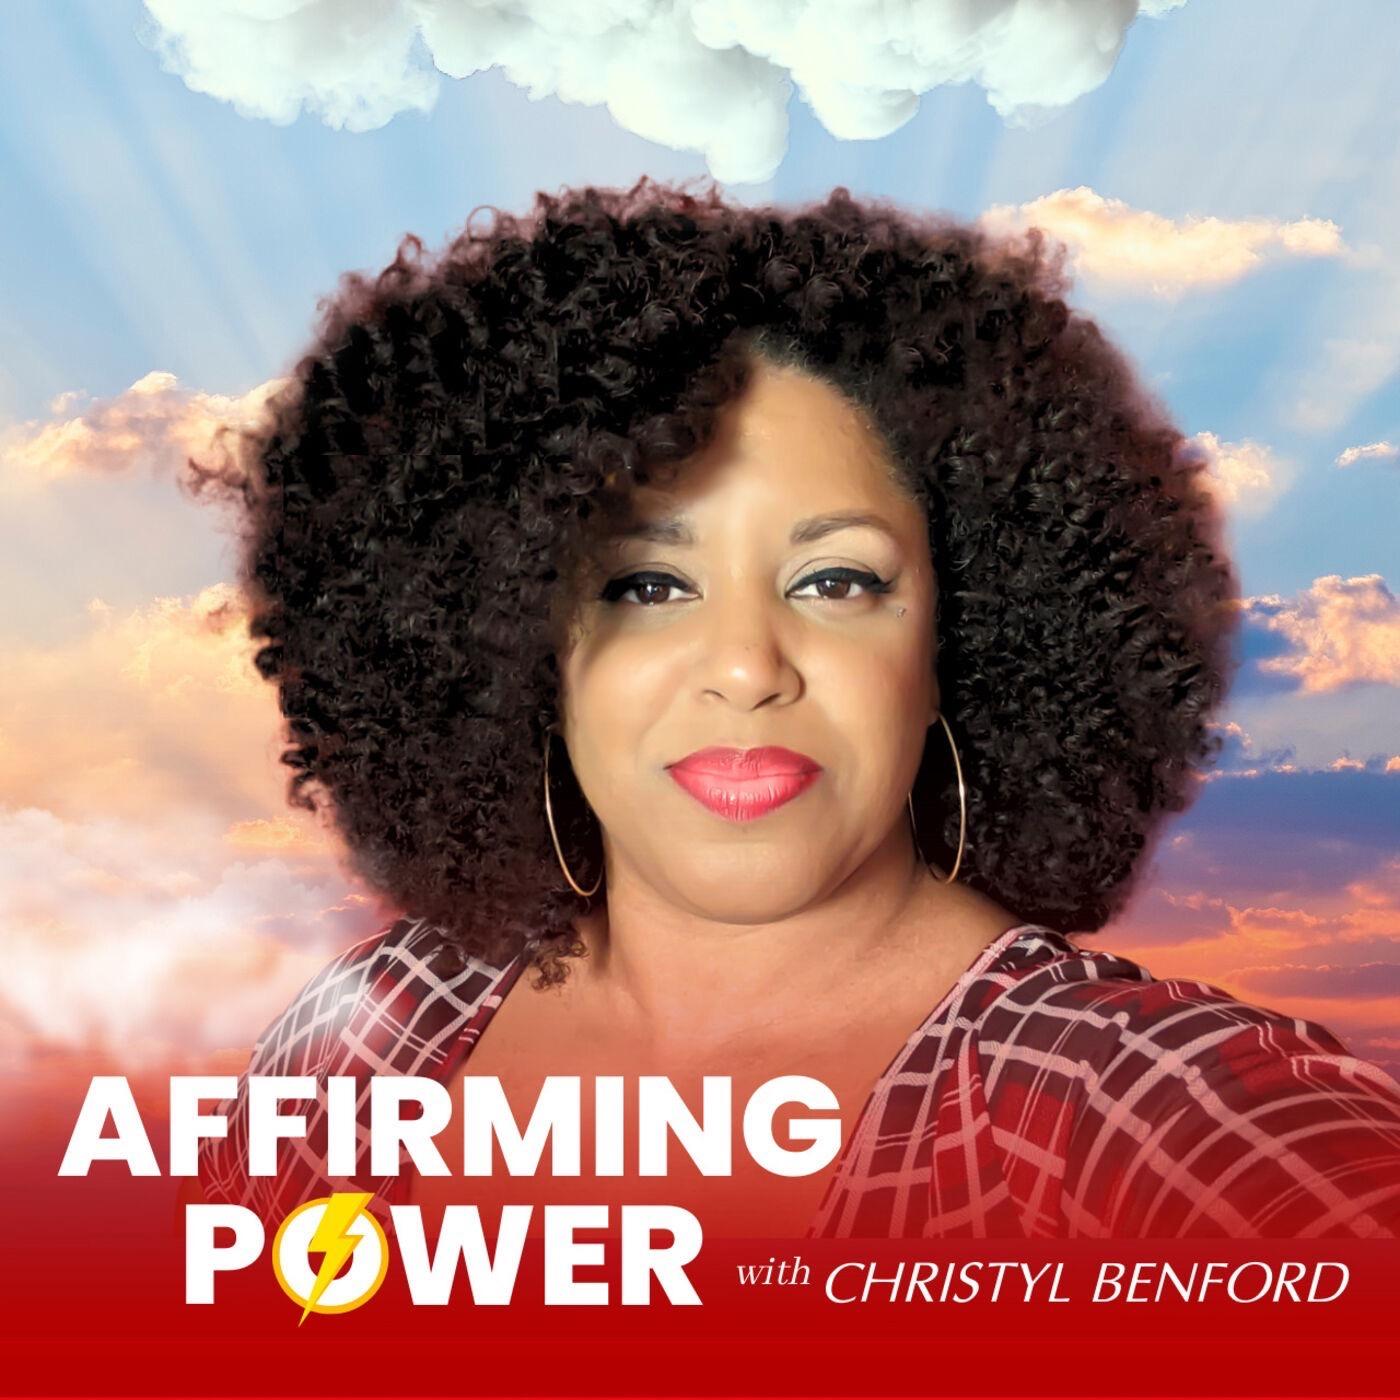 Affirming Power with Christyl Benford